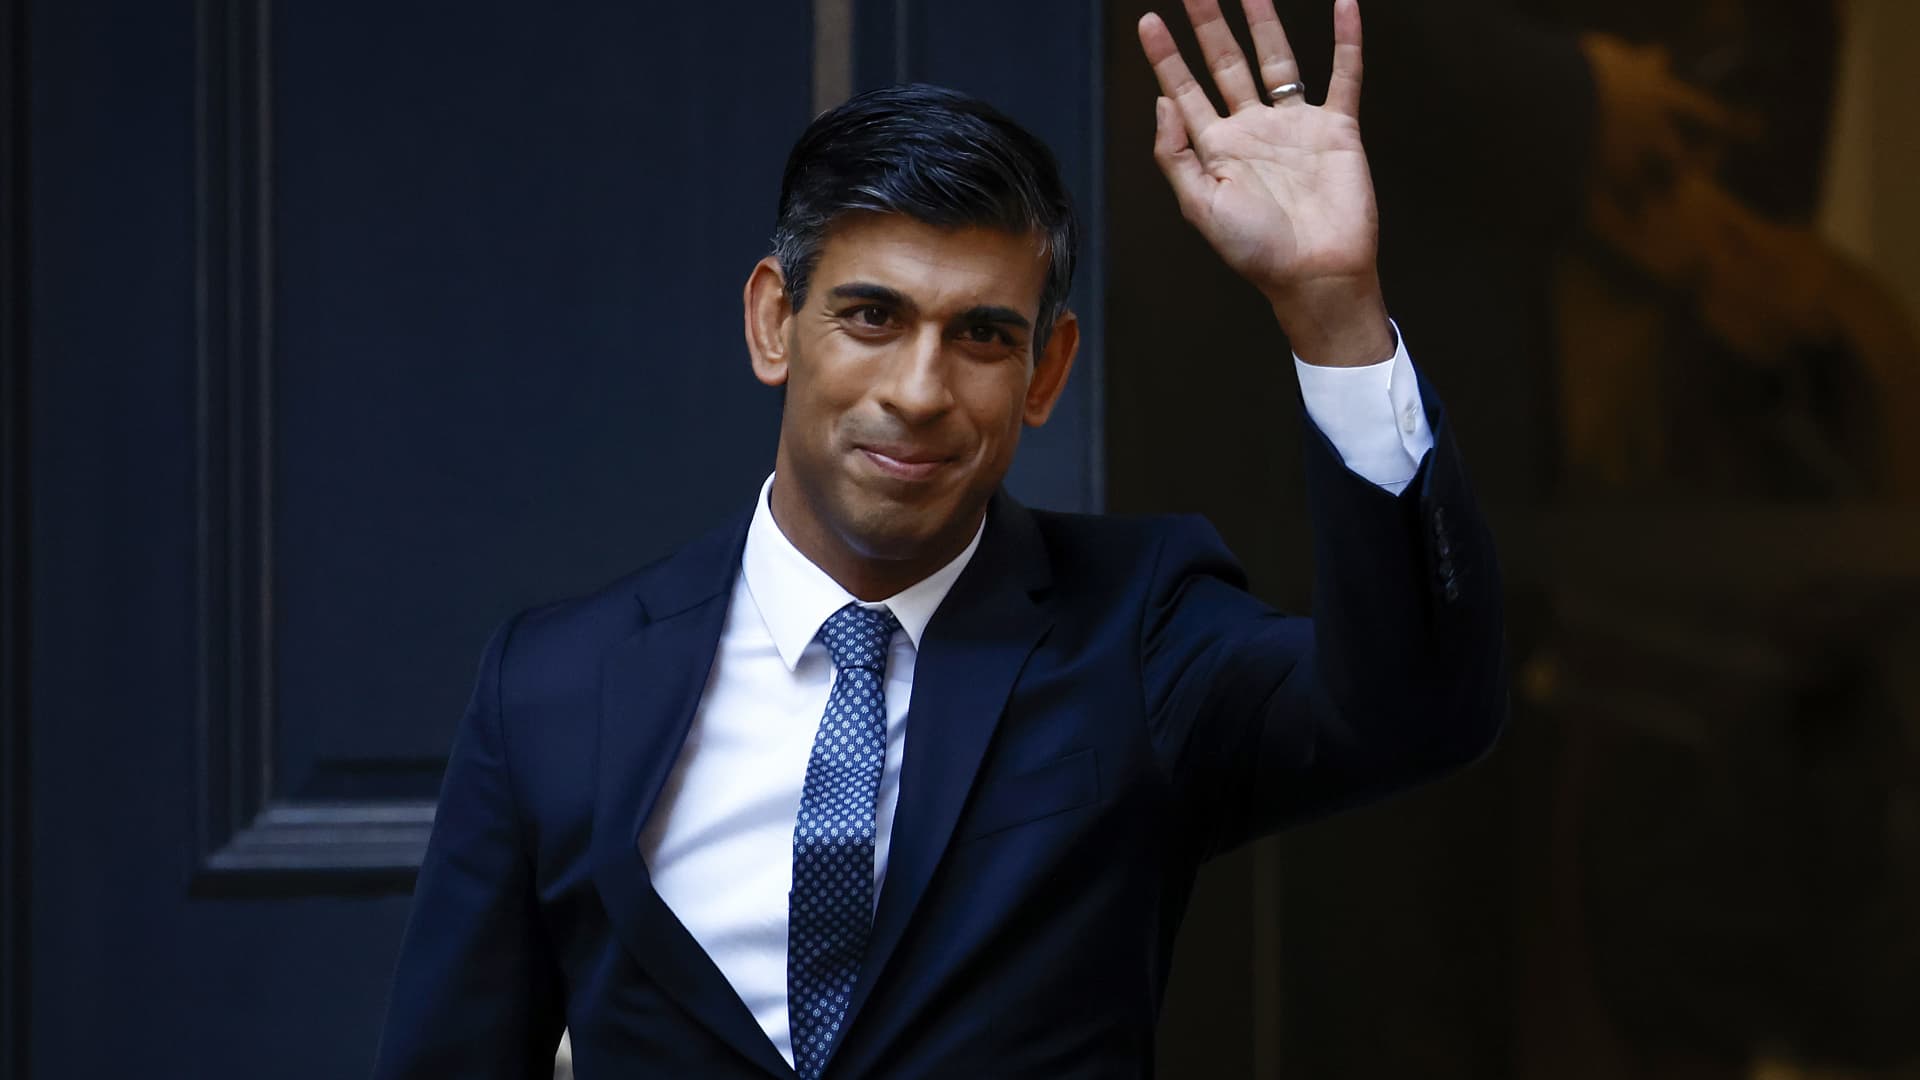 UK’s Rishi Sunak inherits in-tray of anarchy as he takes over as PM of country in crisis